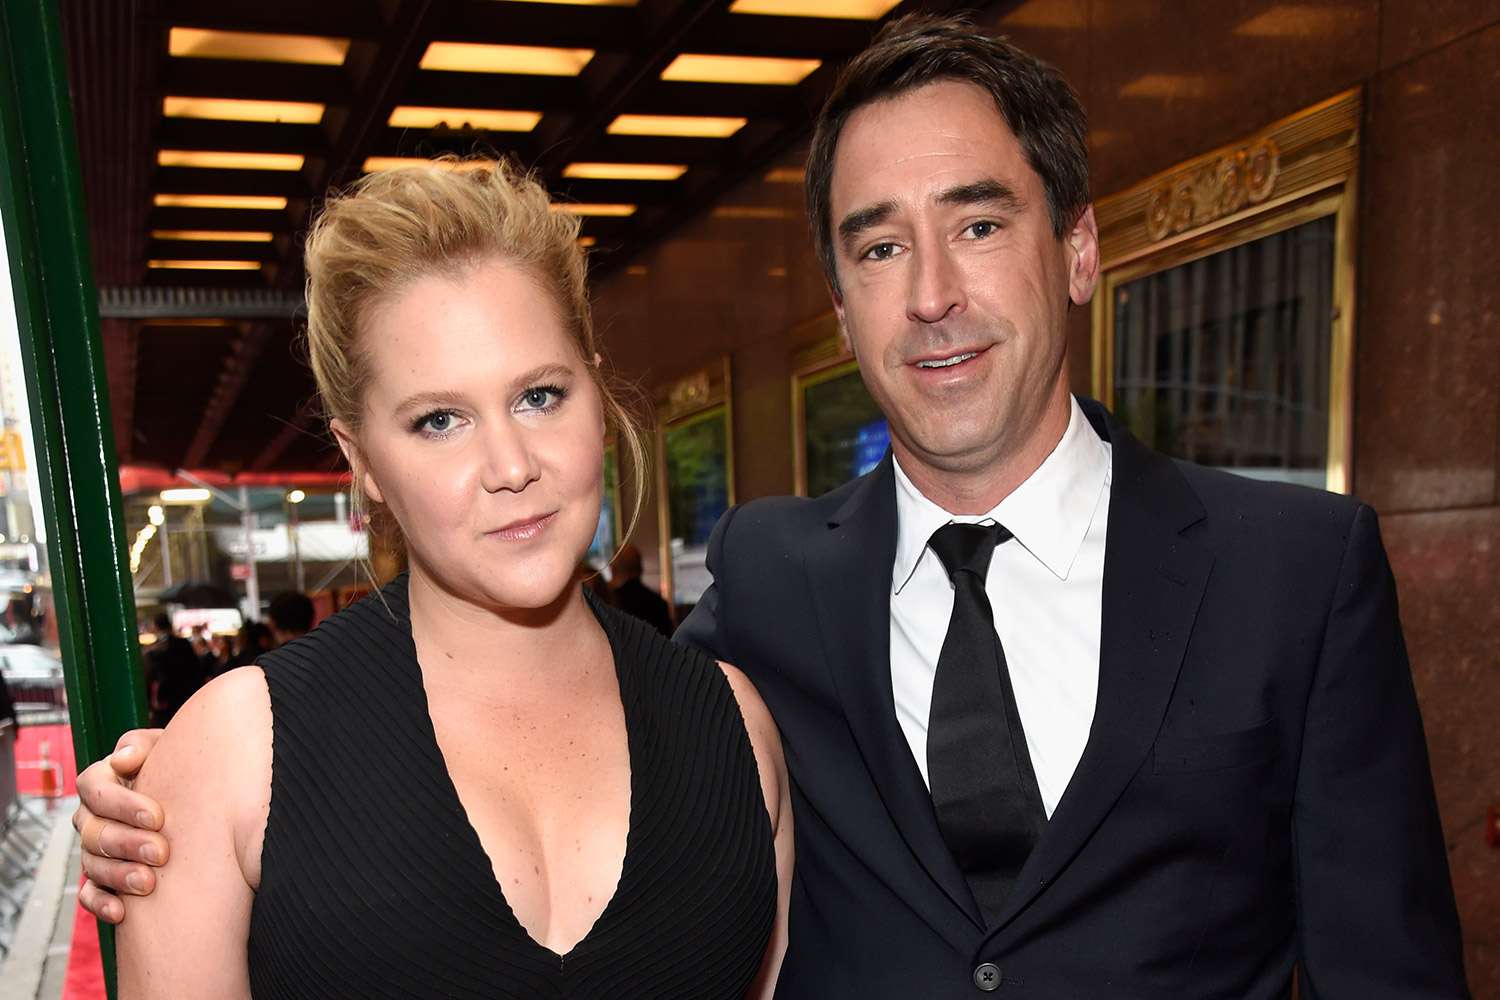 is amy schumer pregnant